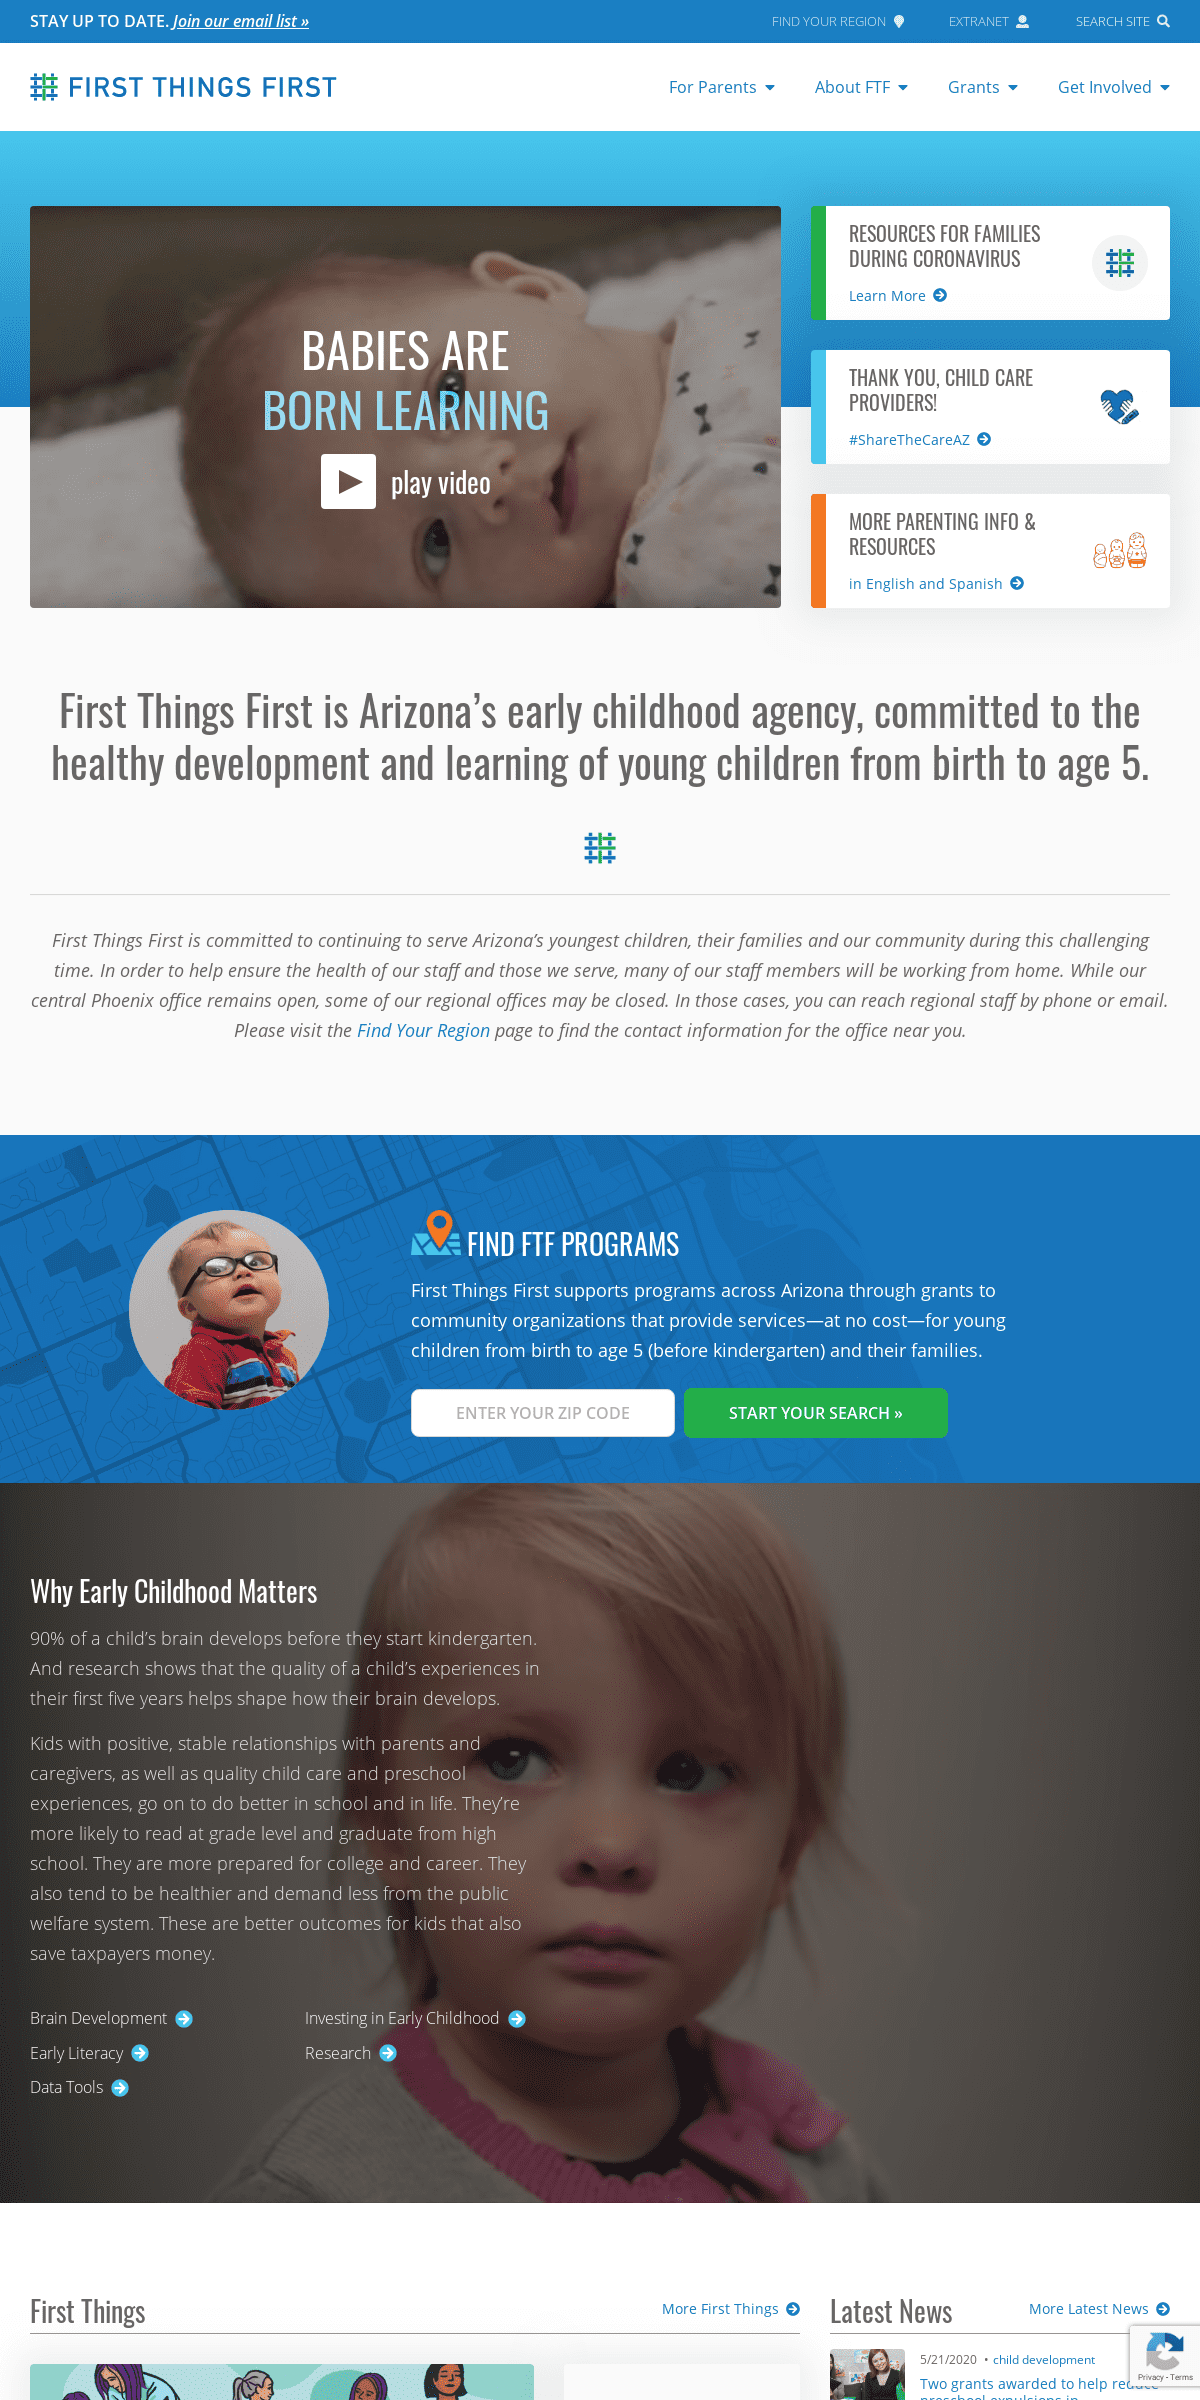 A complete backup of firstthingsfirst.org